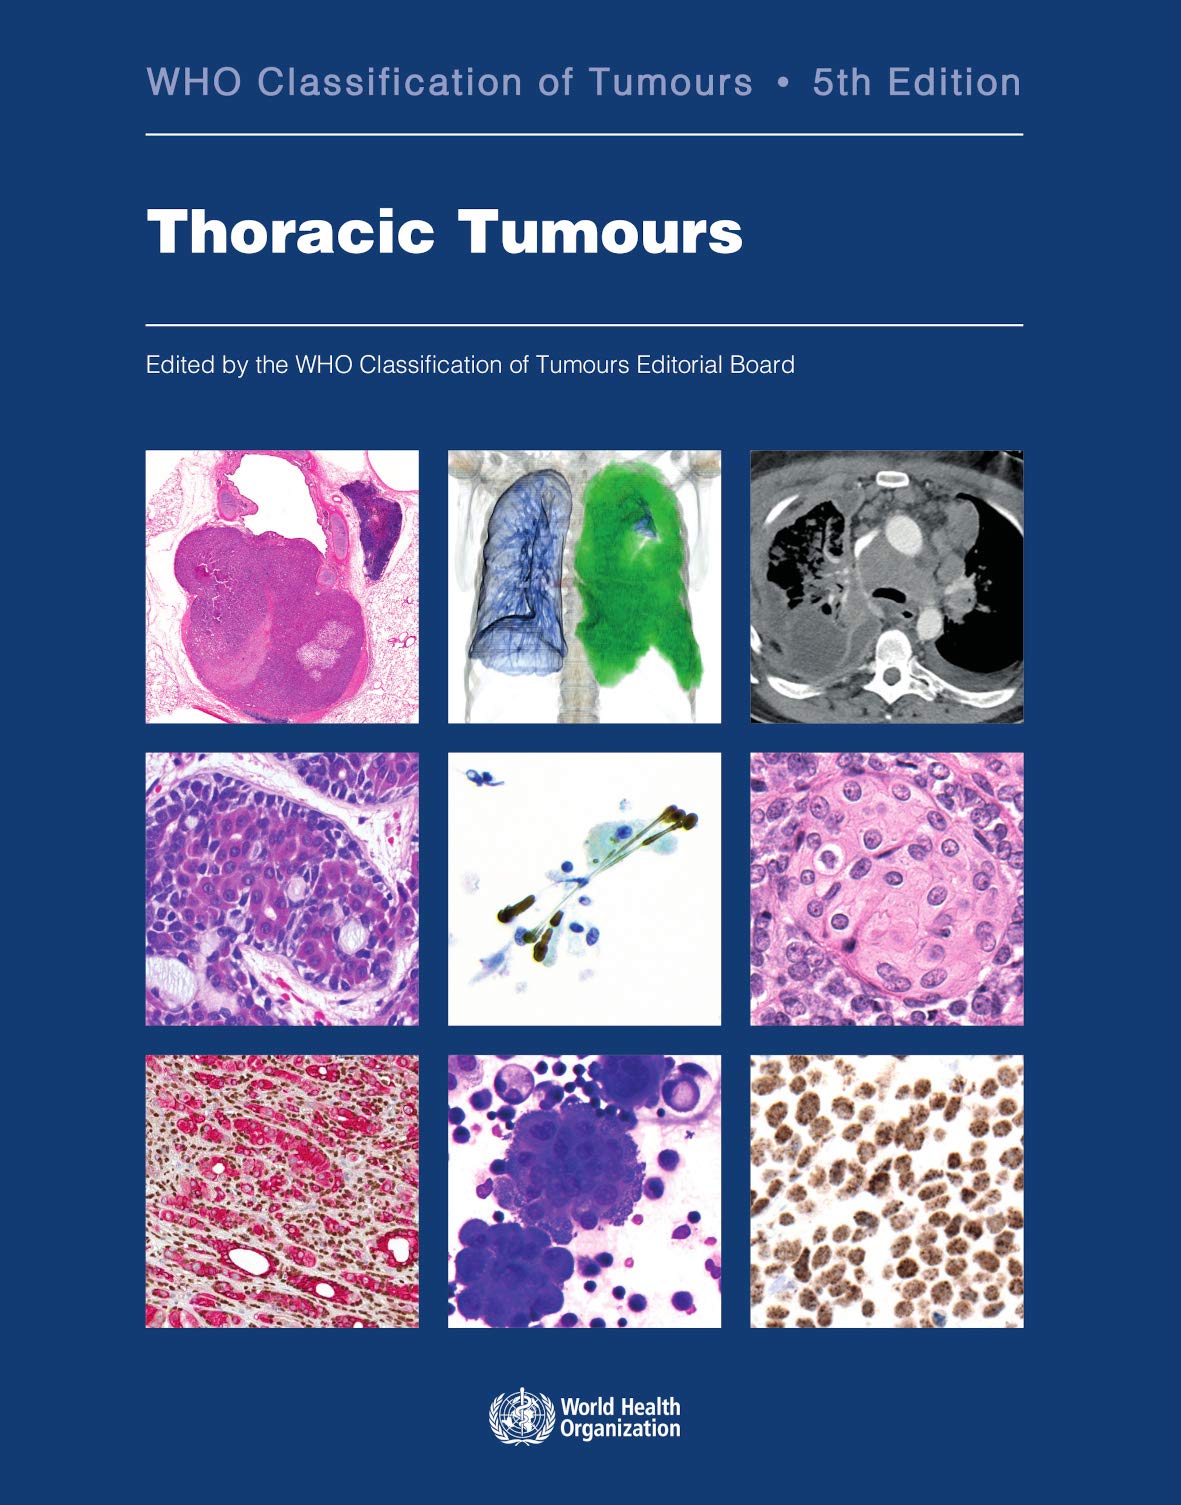 WHO Classification of Tumours, 5th Edition, Volume 5  Thoracic Tumours